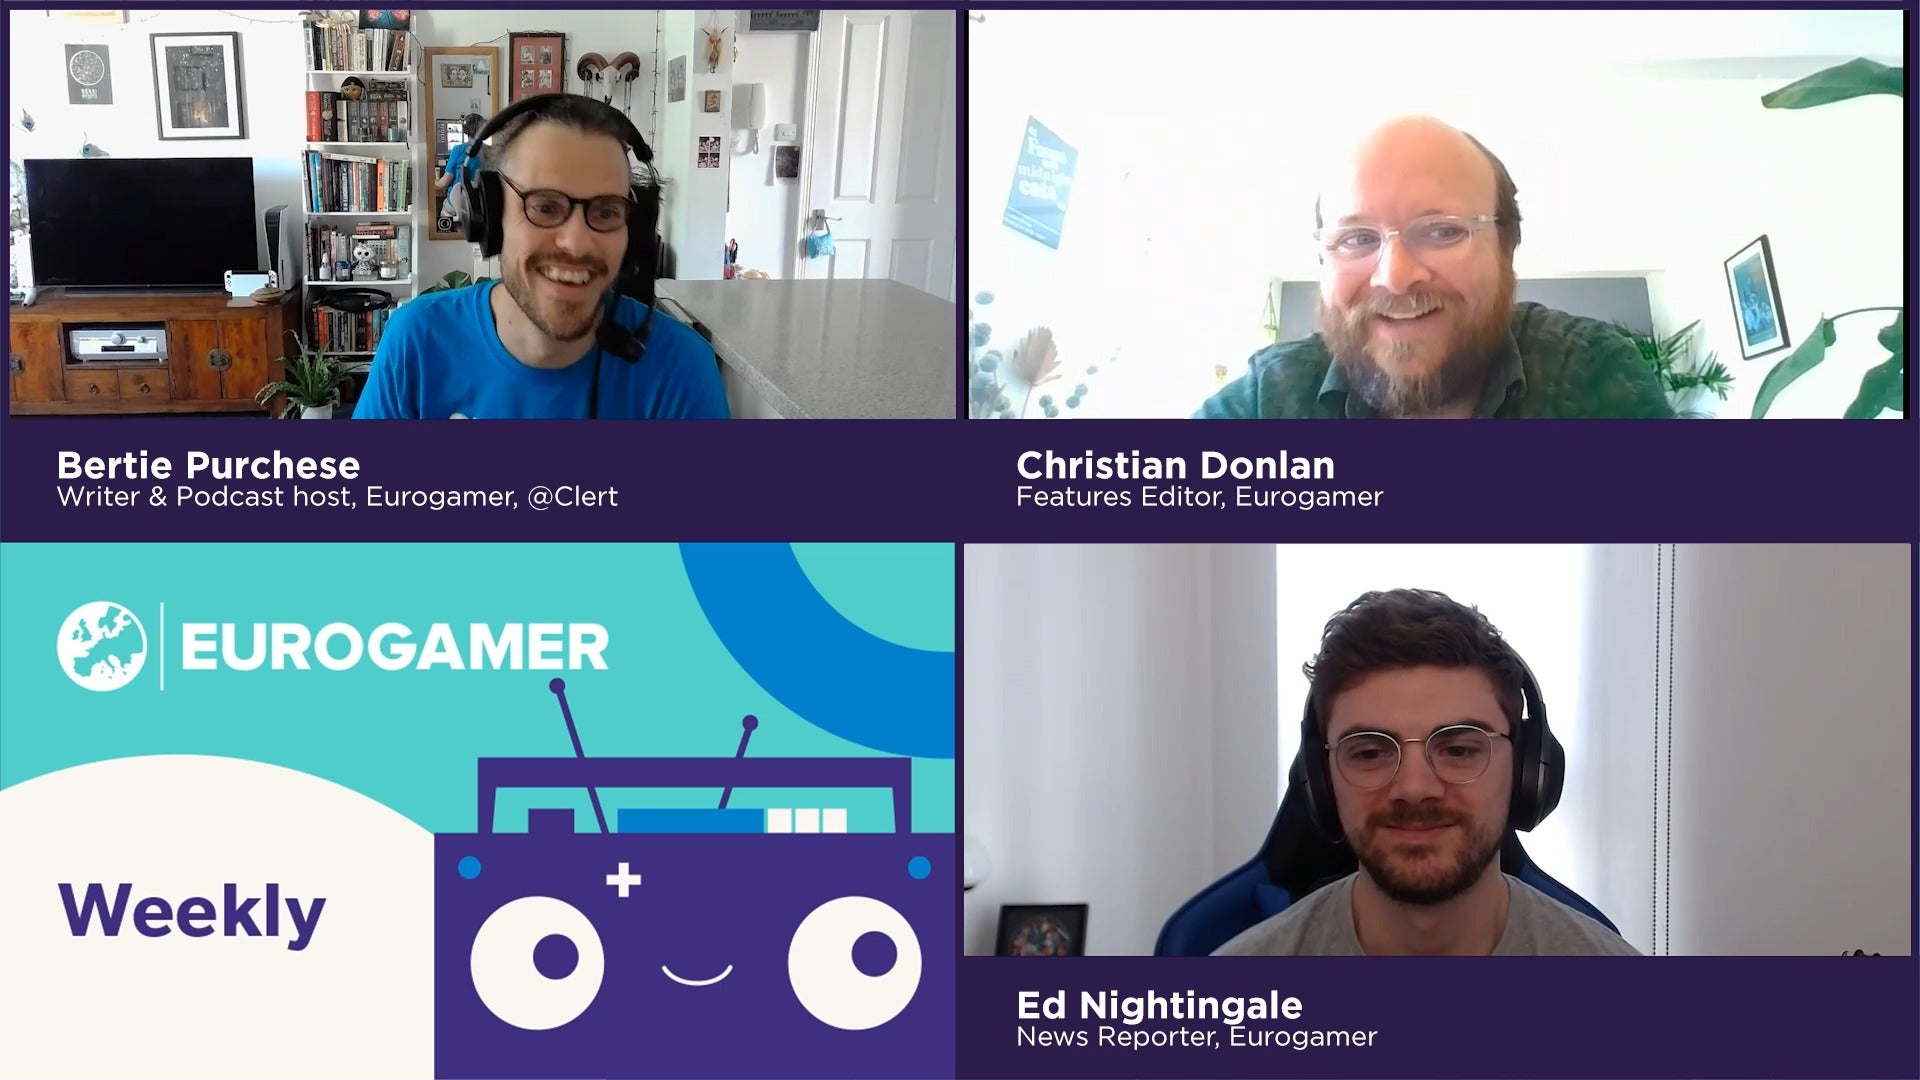 Bertie, Christian Donlan and Ed Nightingale are on a video podcast call together, and they're all laughing, having a jolly good time.